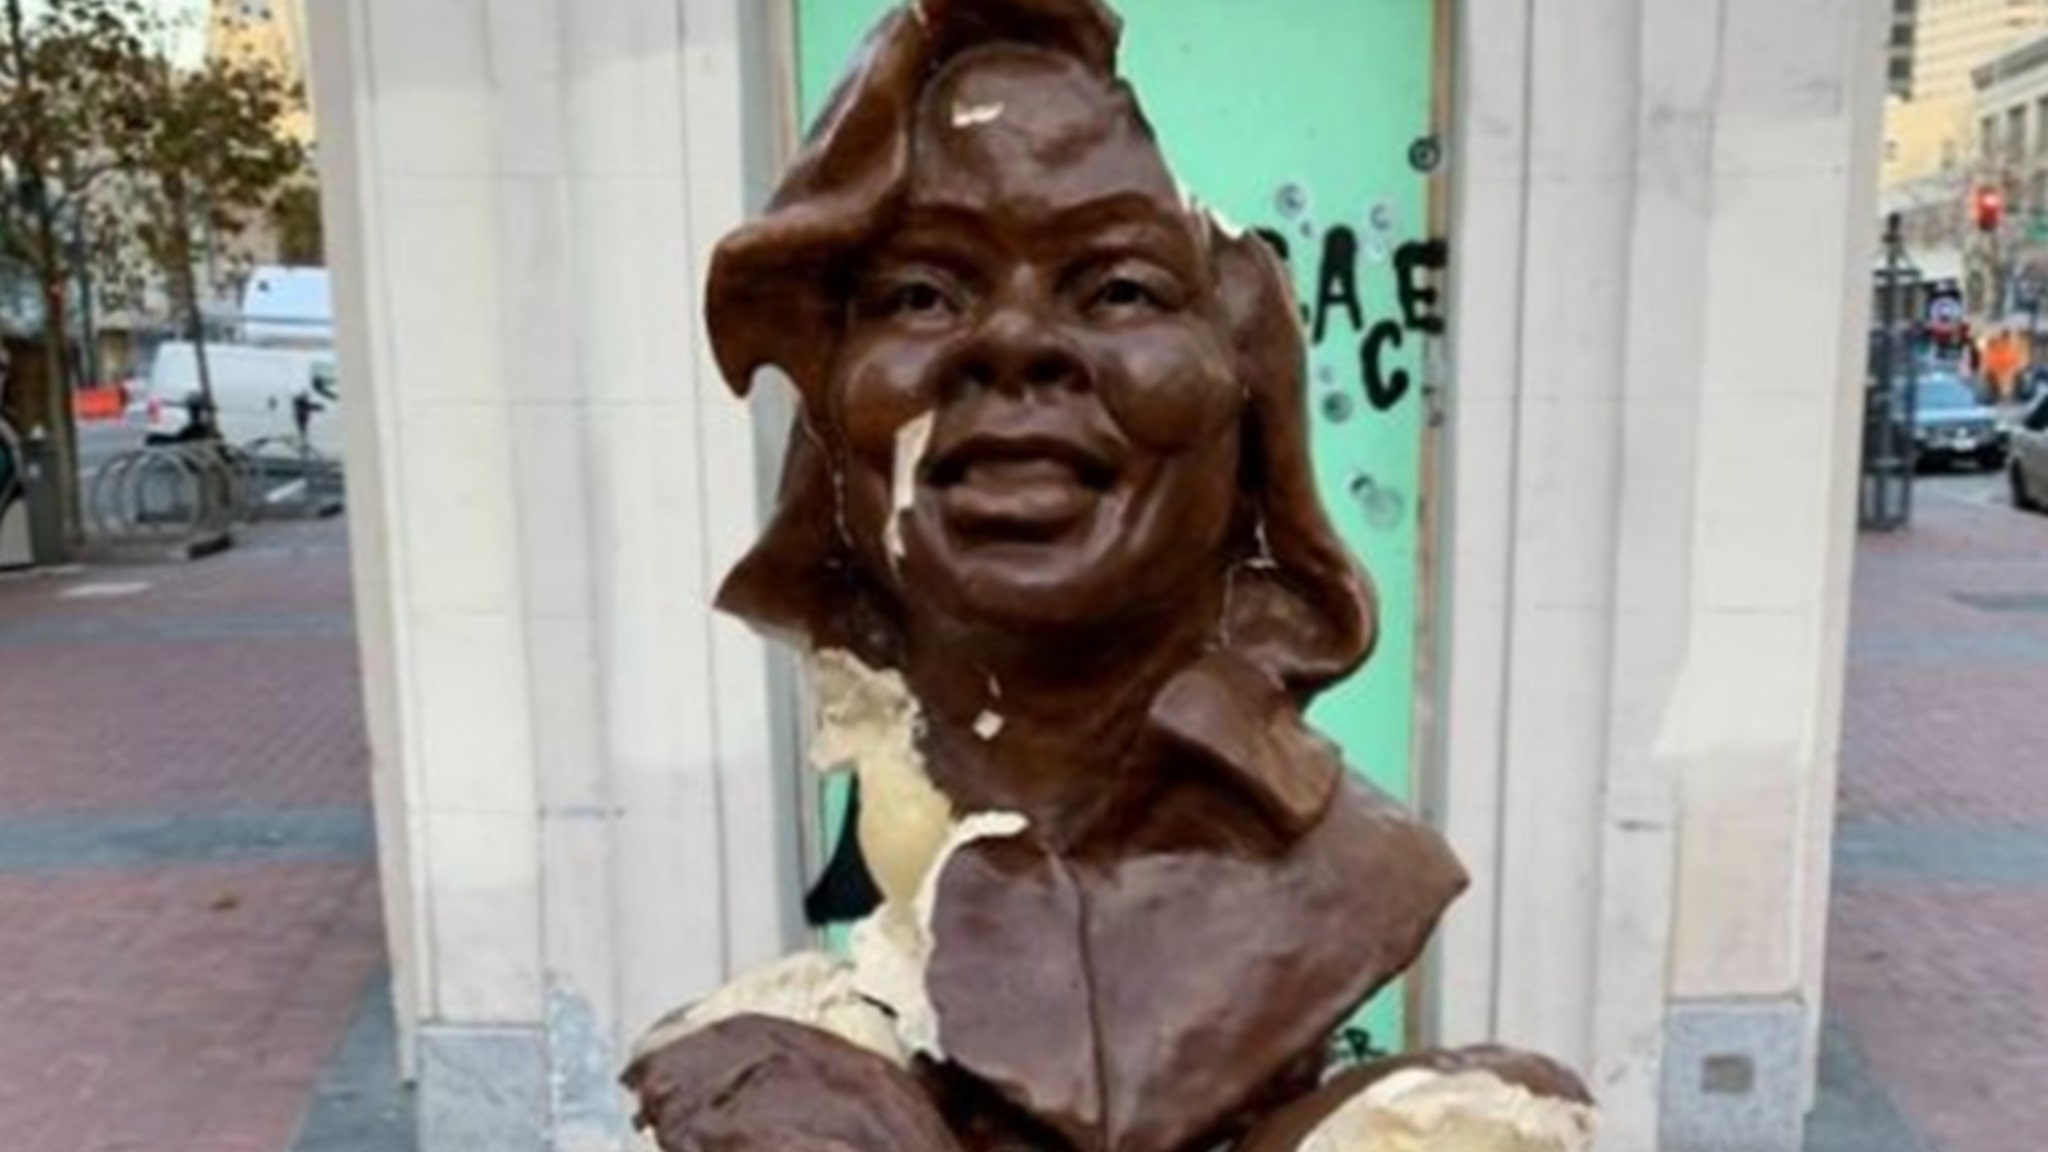 Statue of Breonna Taylor vandalized, sculptor calls it ‘racist aggression’